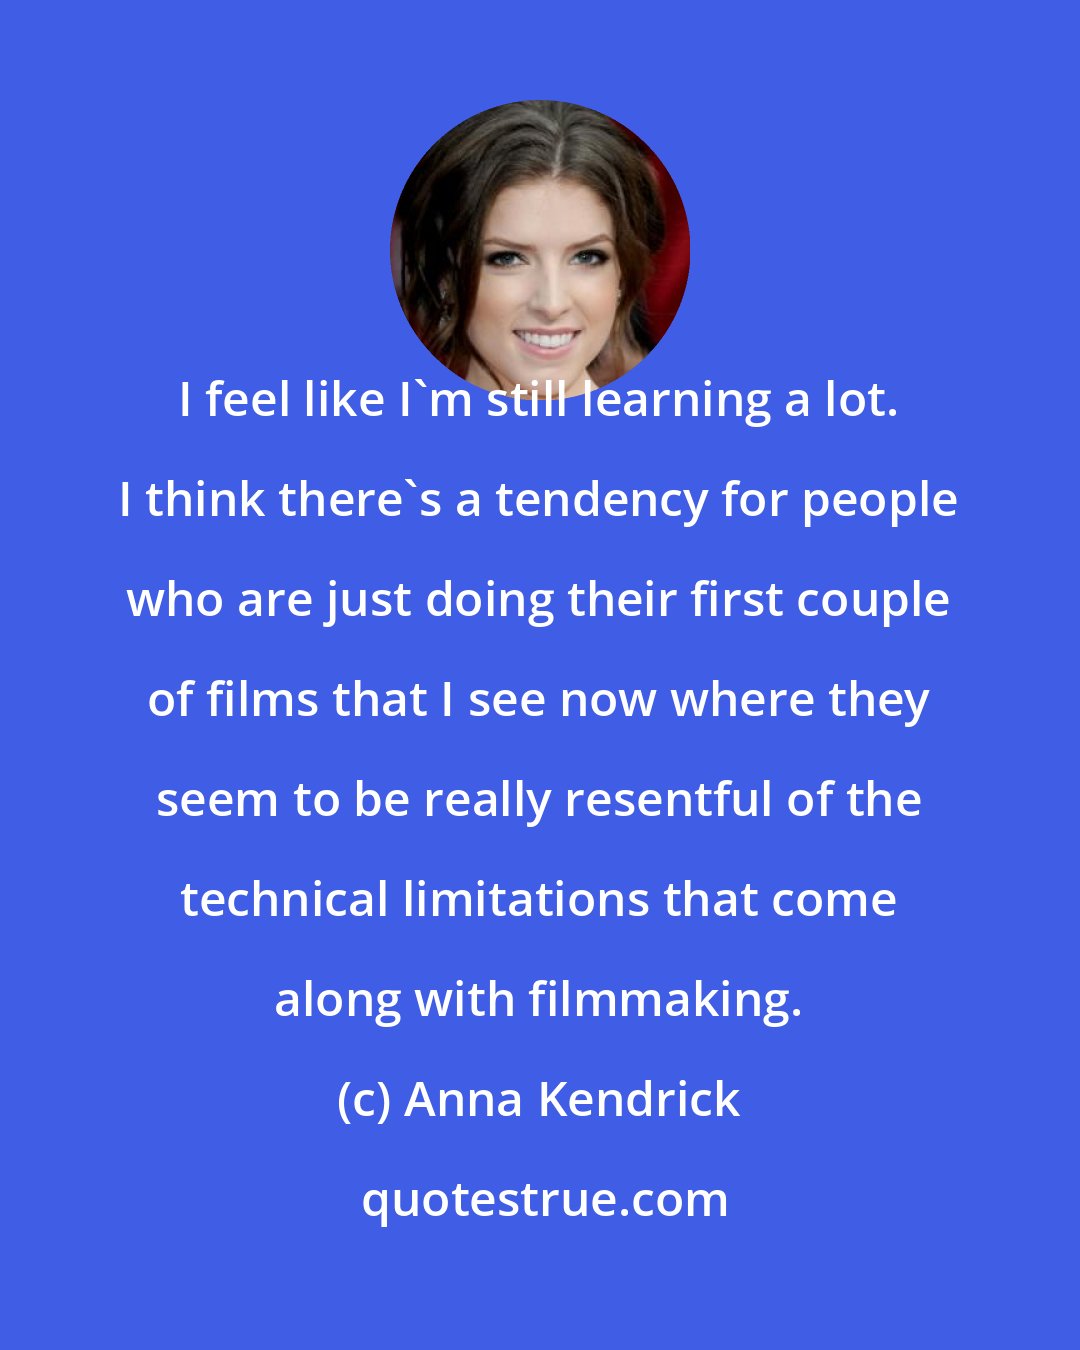 Anna Kendrick: I feel like I'm still learning a lot. I think there's a tendency for people who are just doing their first couple of films that I see now where they seem to be really resentful of the technical limitations that come along with filmmaking.